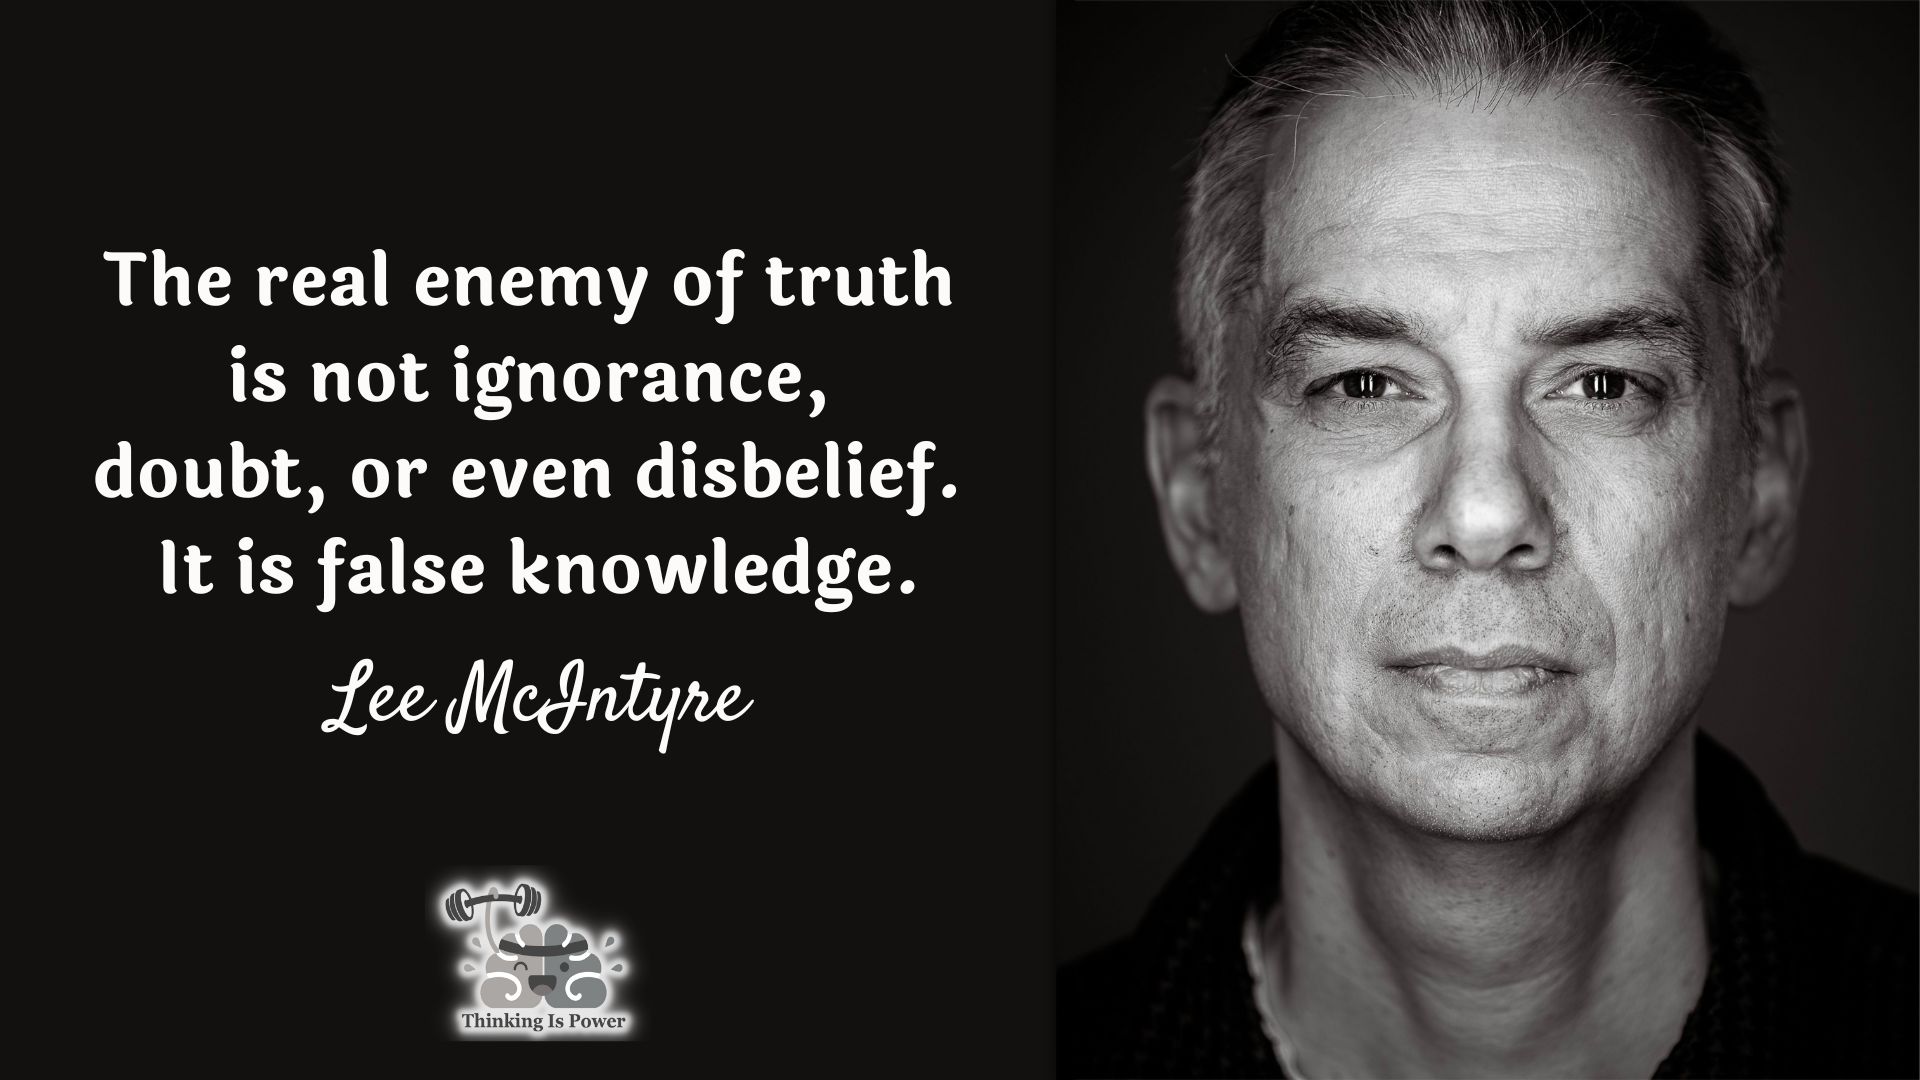 Quote Lee McIntyre The real enemy of truth is not ignorance, doubt, or even disbelief. It is false knowledge.